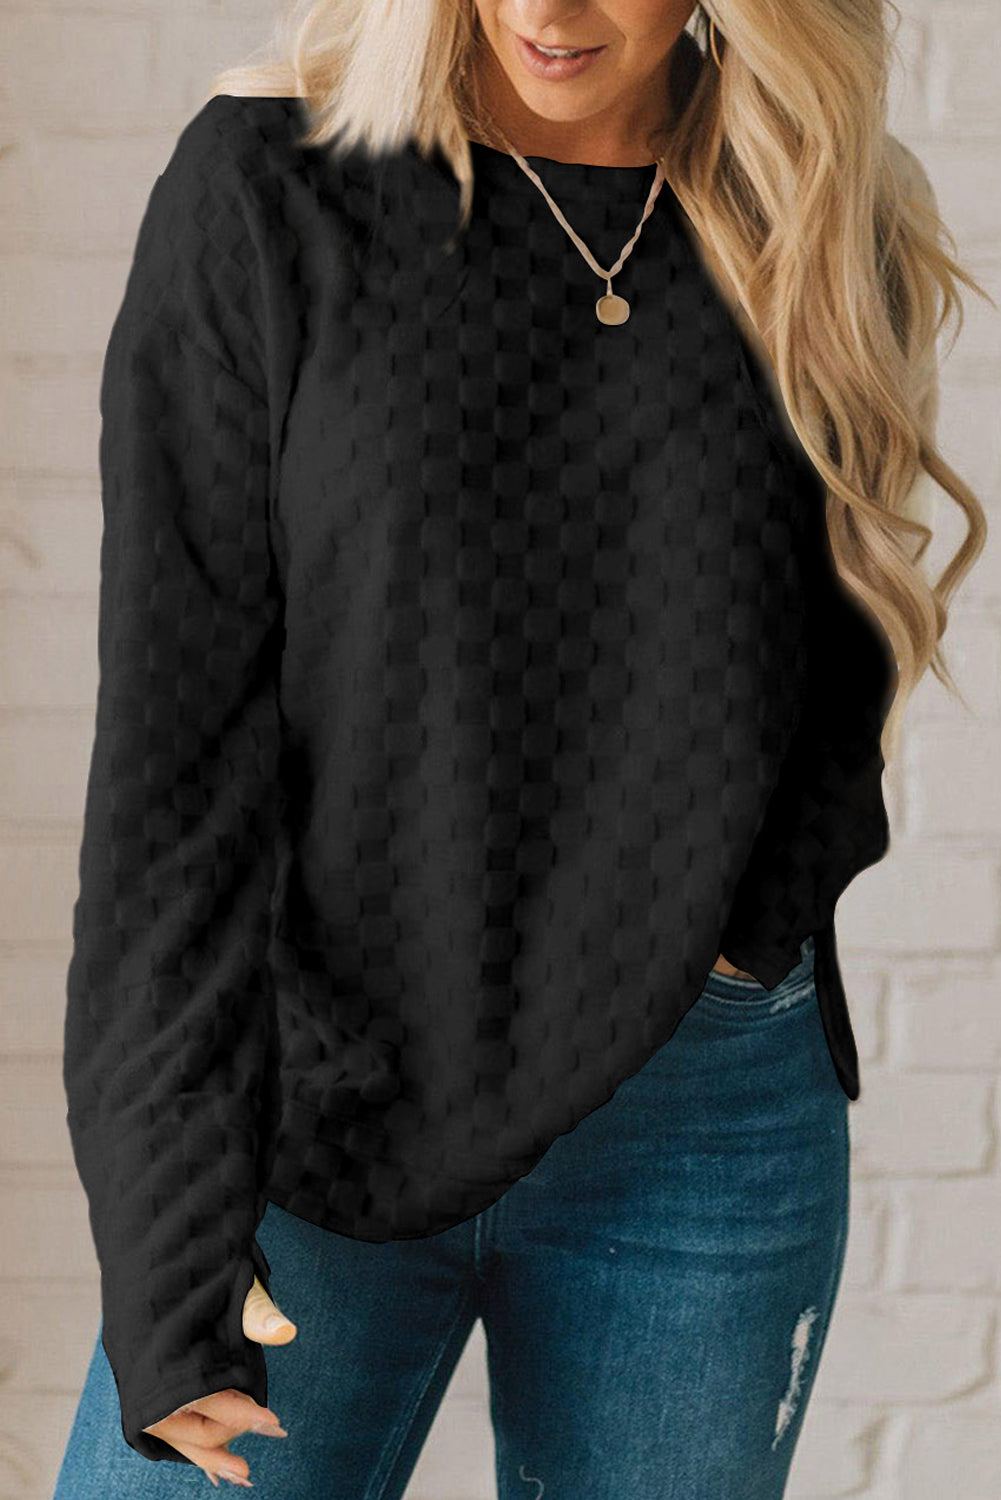 Women's Black Checkered Long Sleeve Top- Stylish and Comfortable